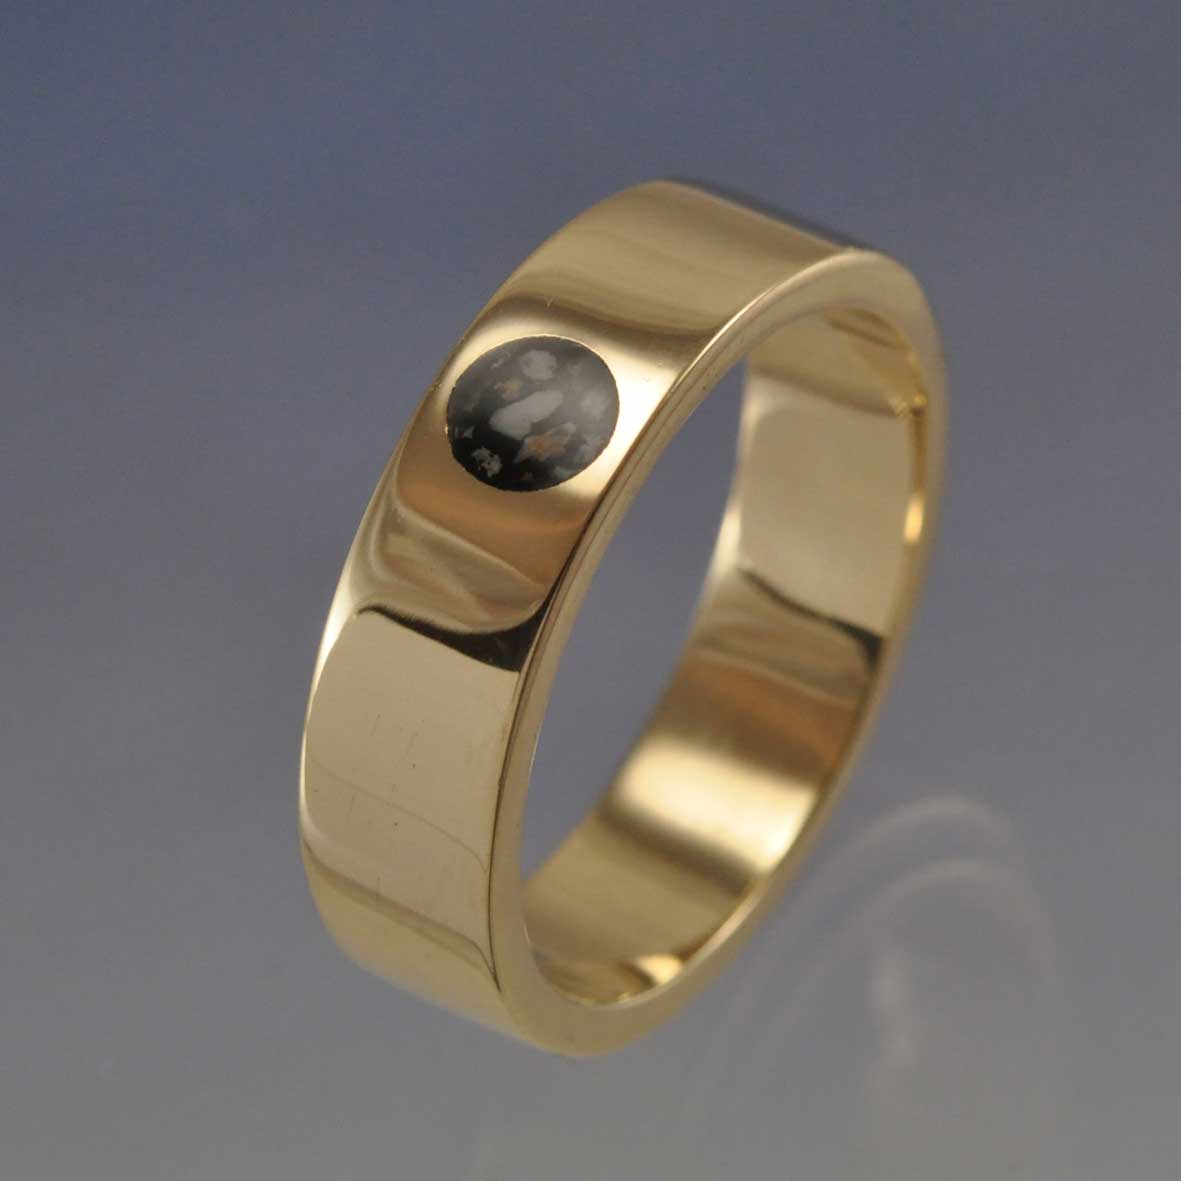 Cremation Ash Ring. 5mm Full Moon Ring by Chris Parry Jewellery